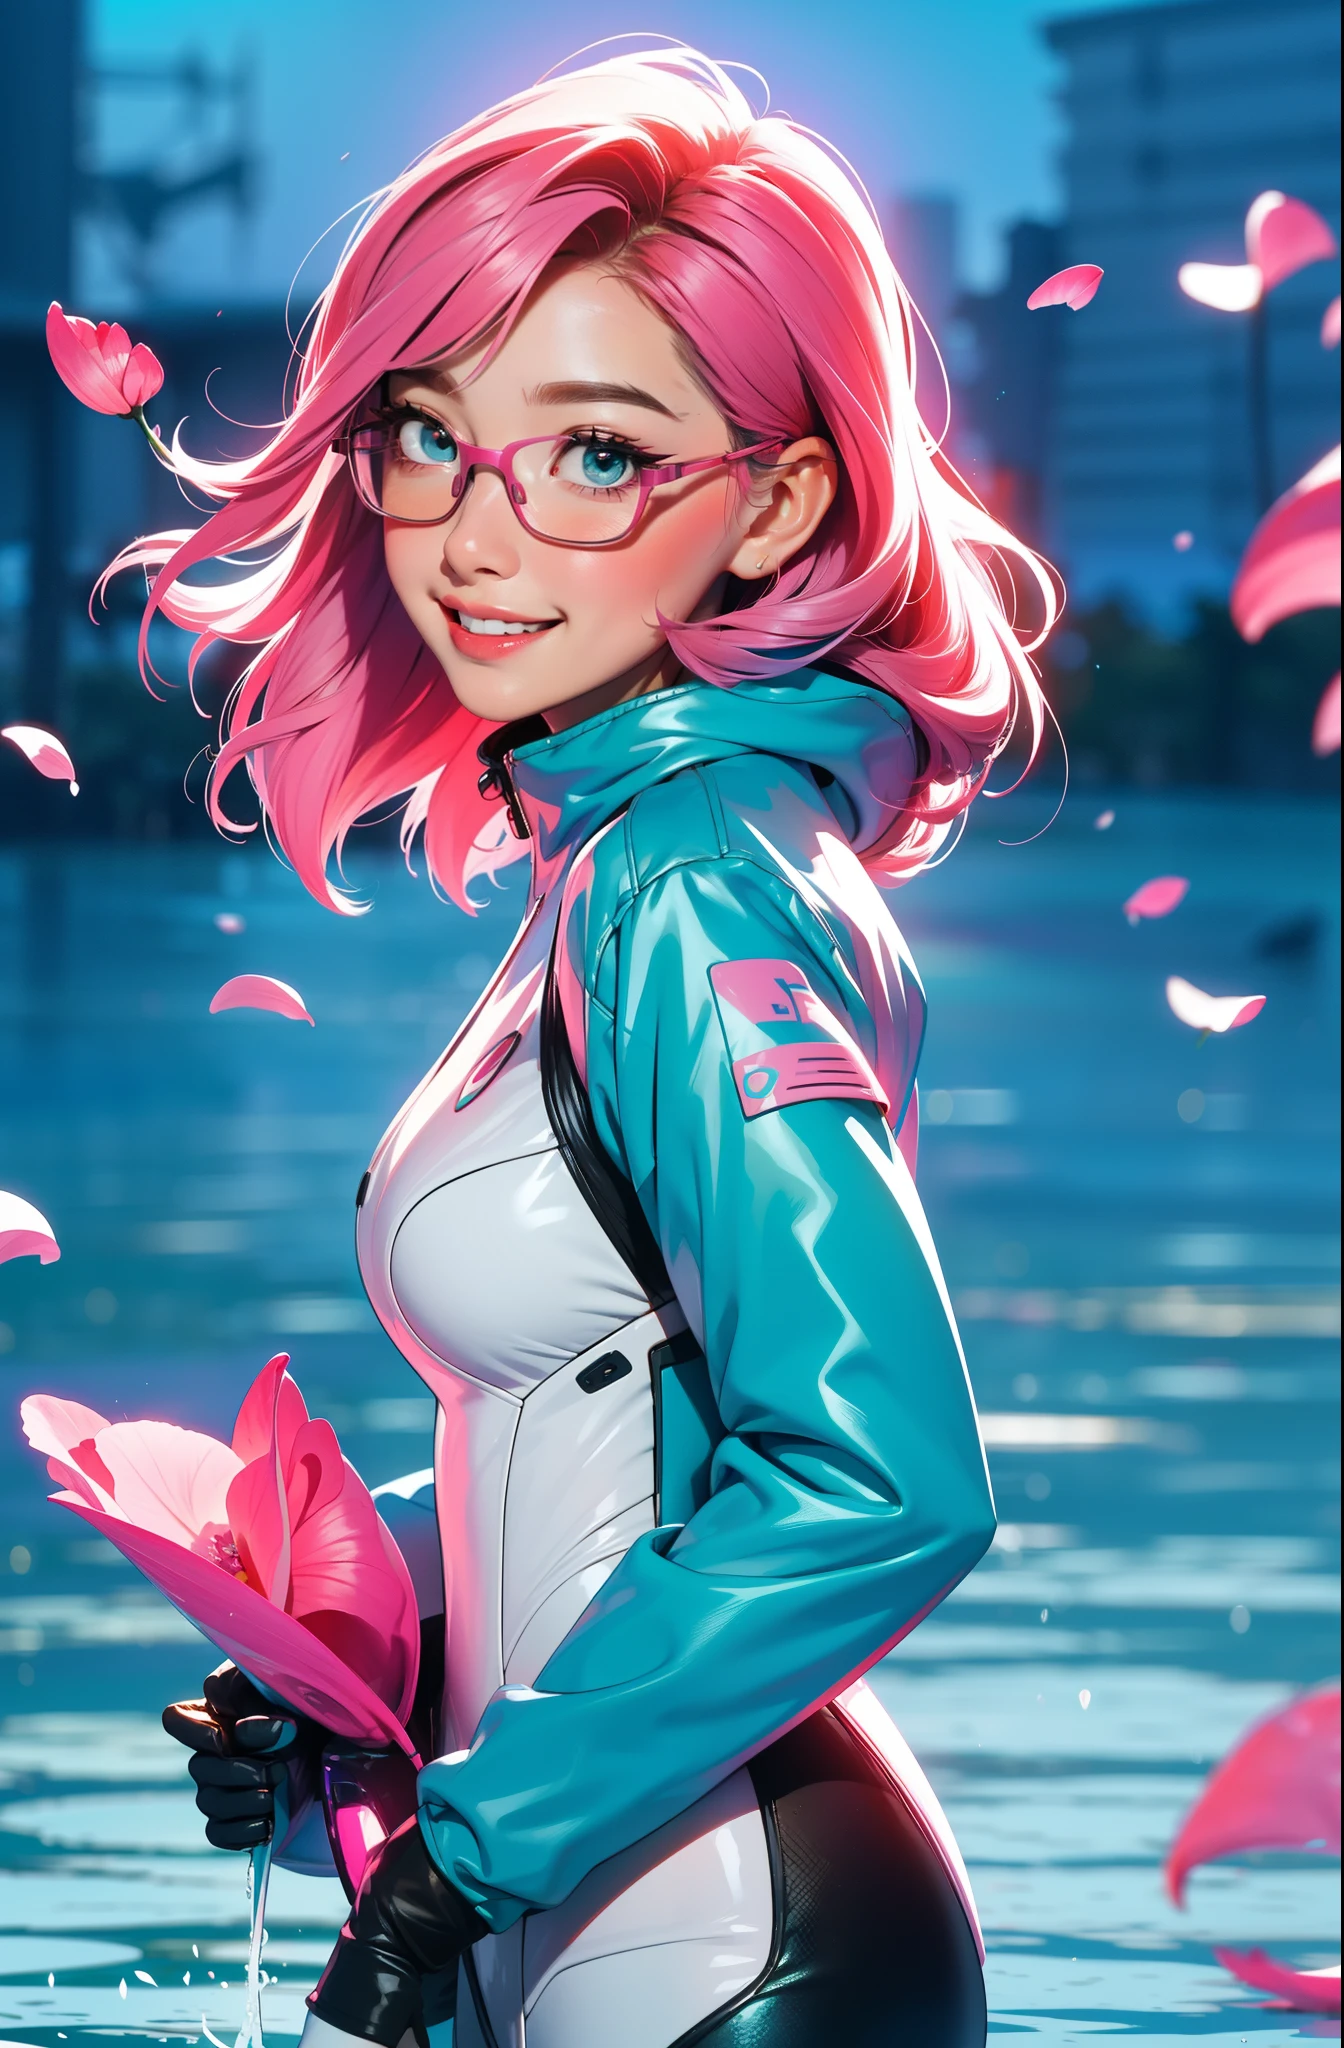 Eyeglasses, Vision Pro googles, cyberpunk female woman (chromatic accents:1.1), sleek pink and White full bodysuit, side view turning to face camera, (Petal Blush, Lagoon Blue color background:1.3), amazing smile, looking at camera, golden hour